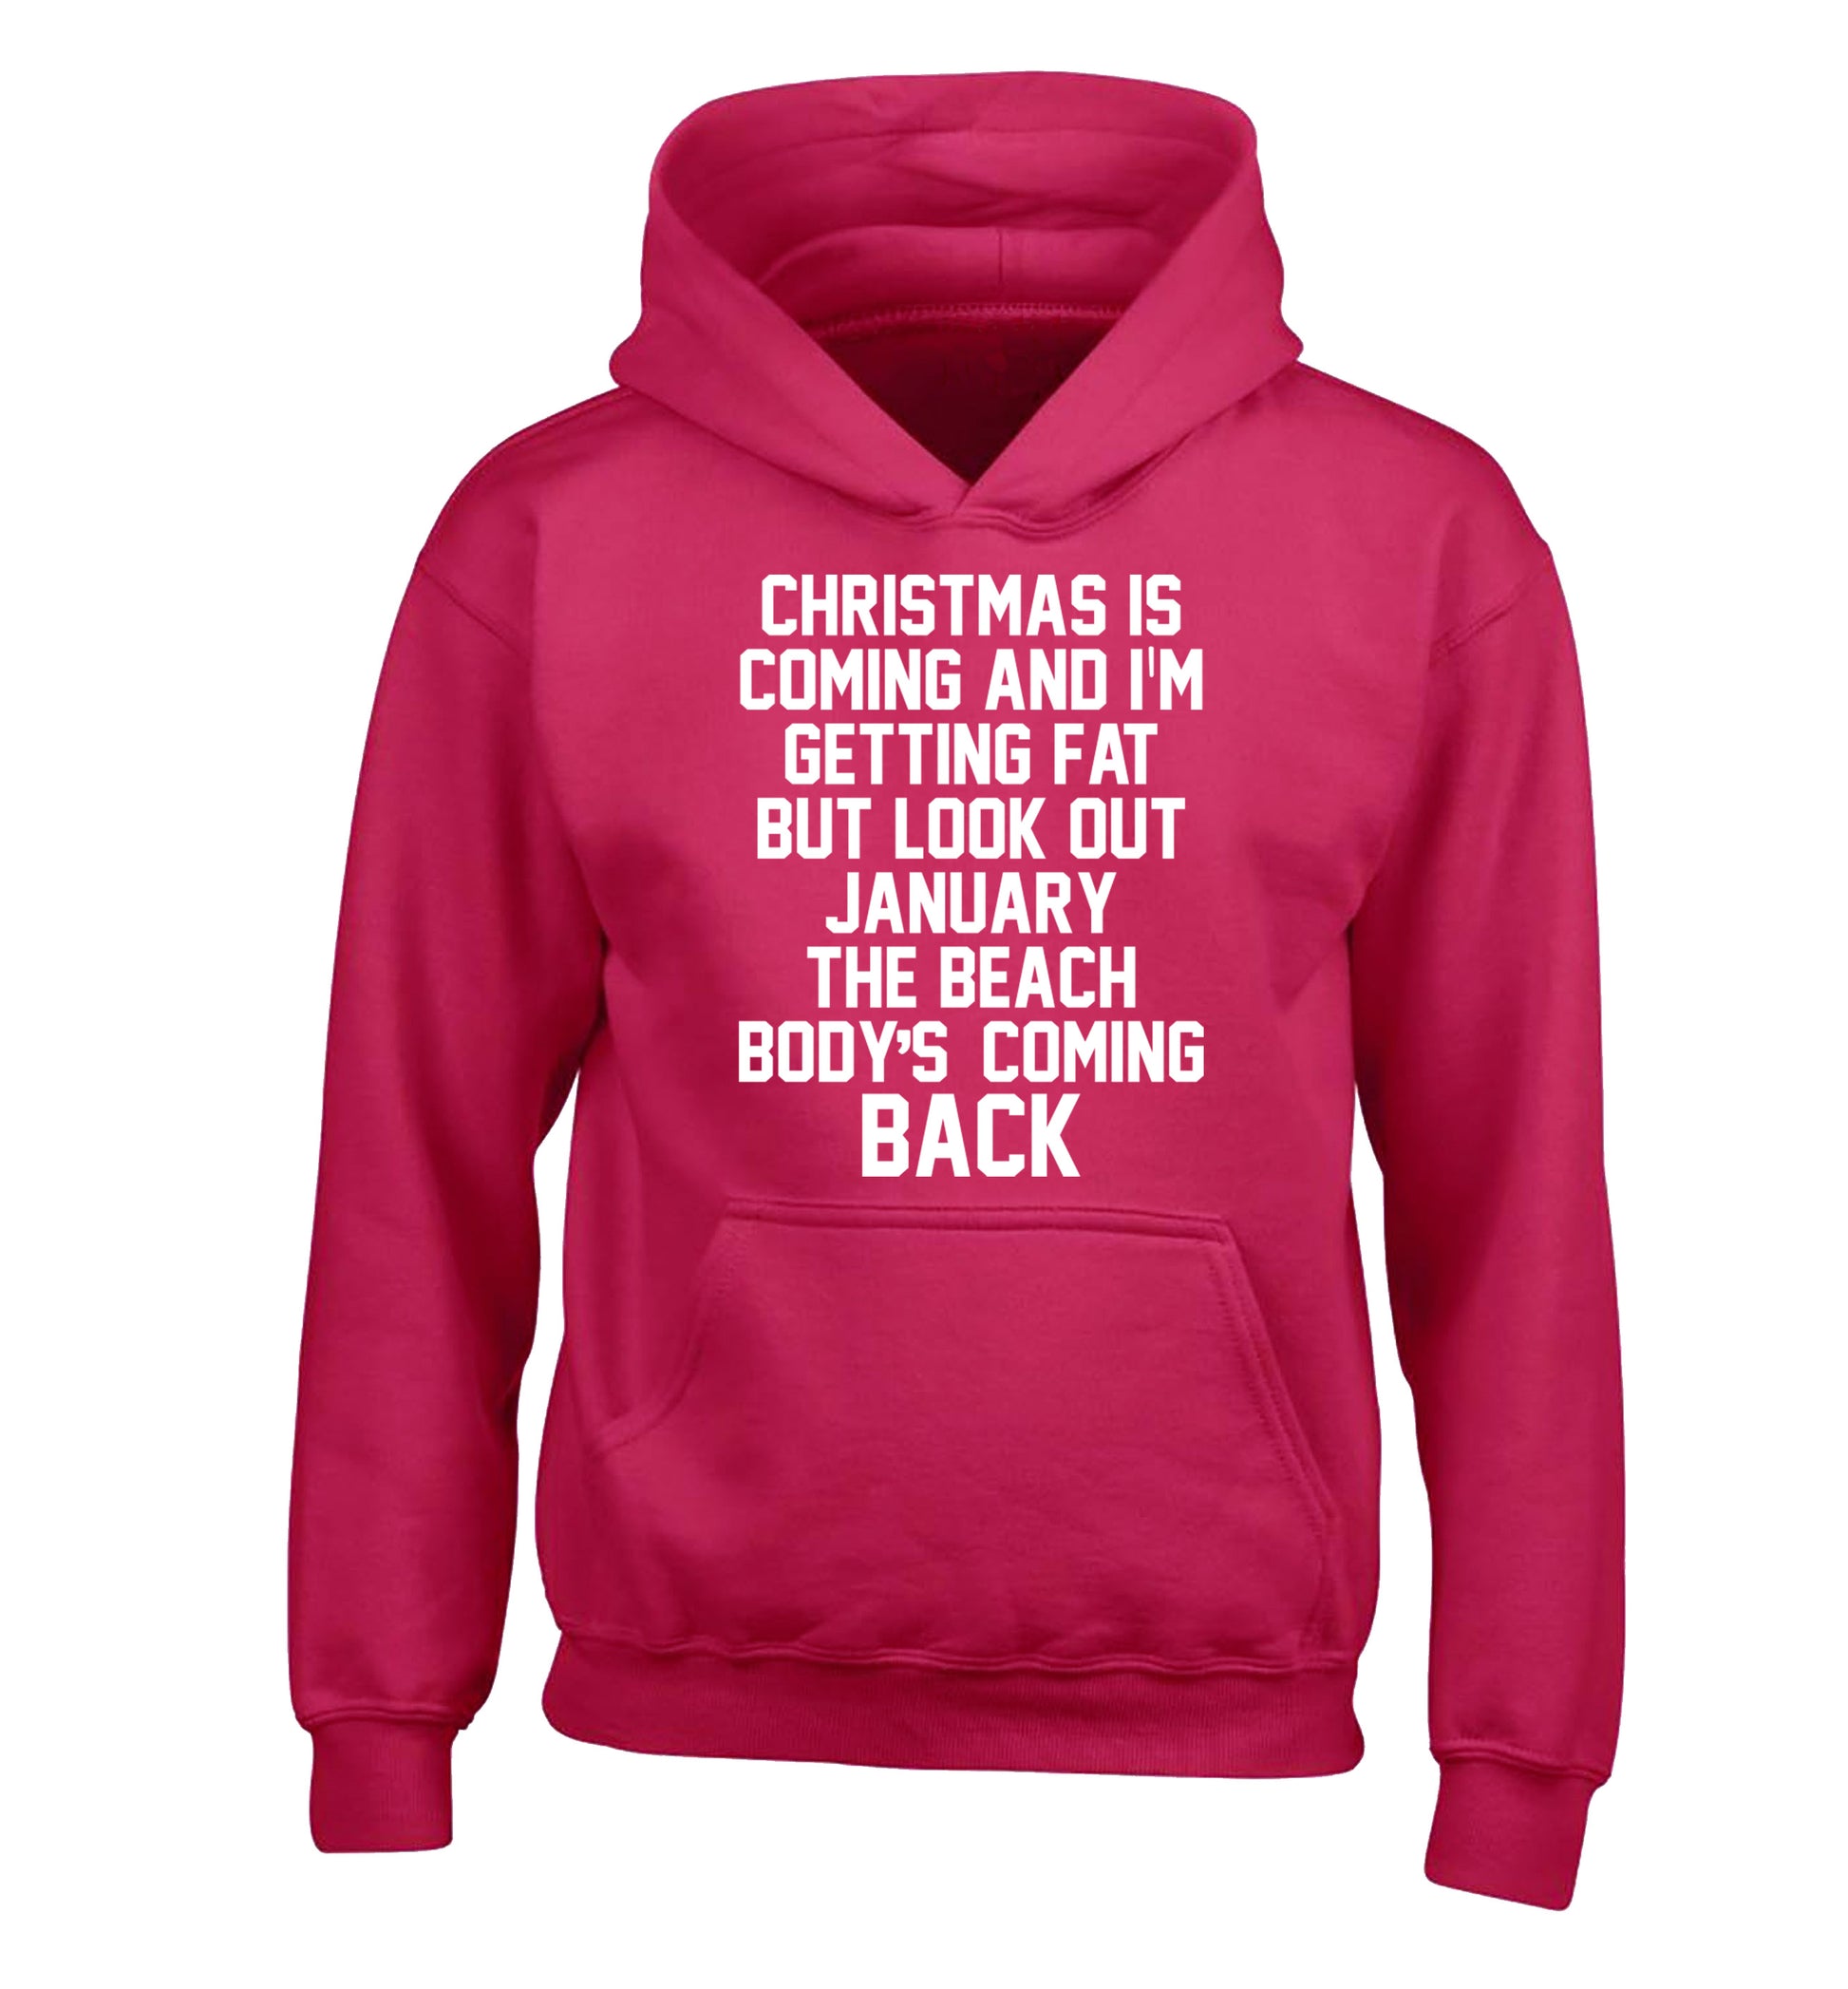 Christmas is coming and I'm getting fat but look out January the beach body's coming back! children's pink hoodie 12-14 Years